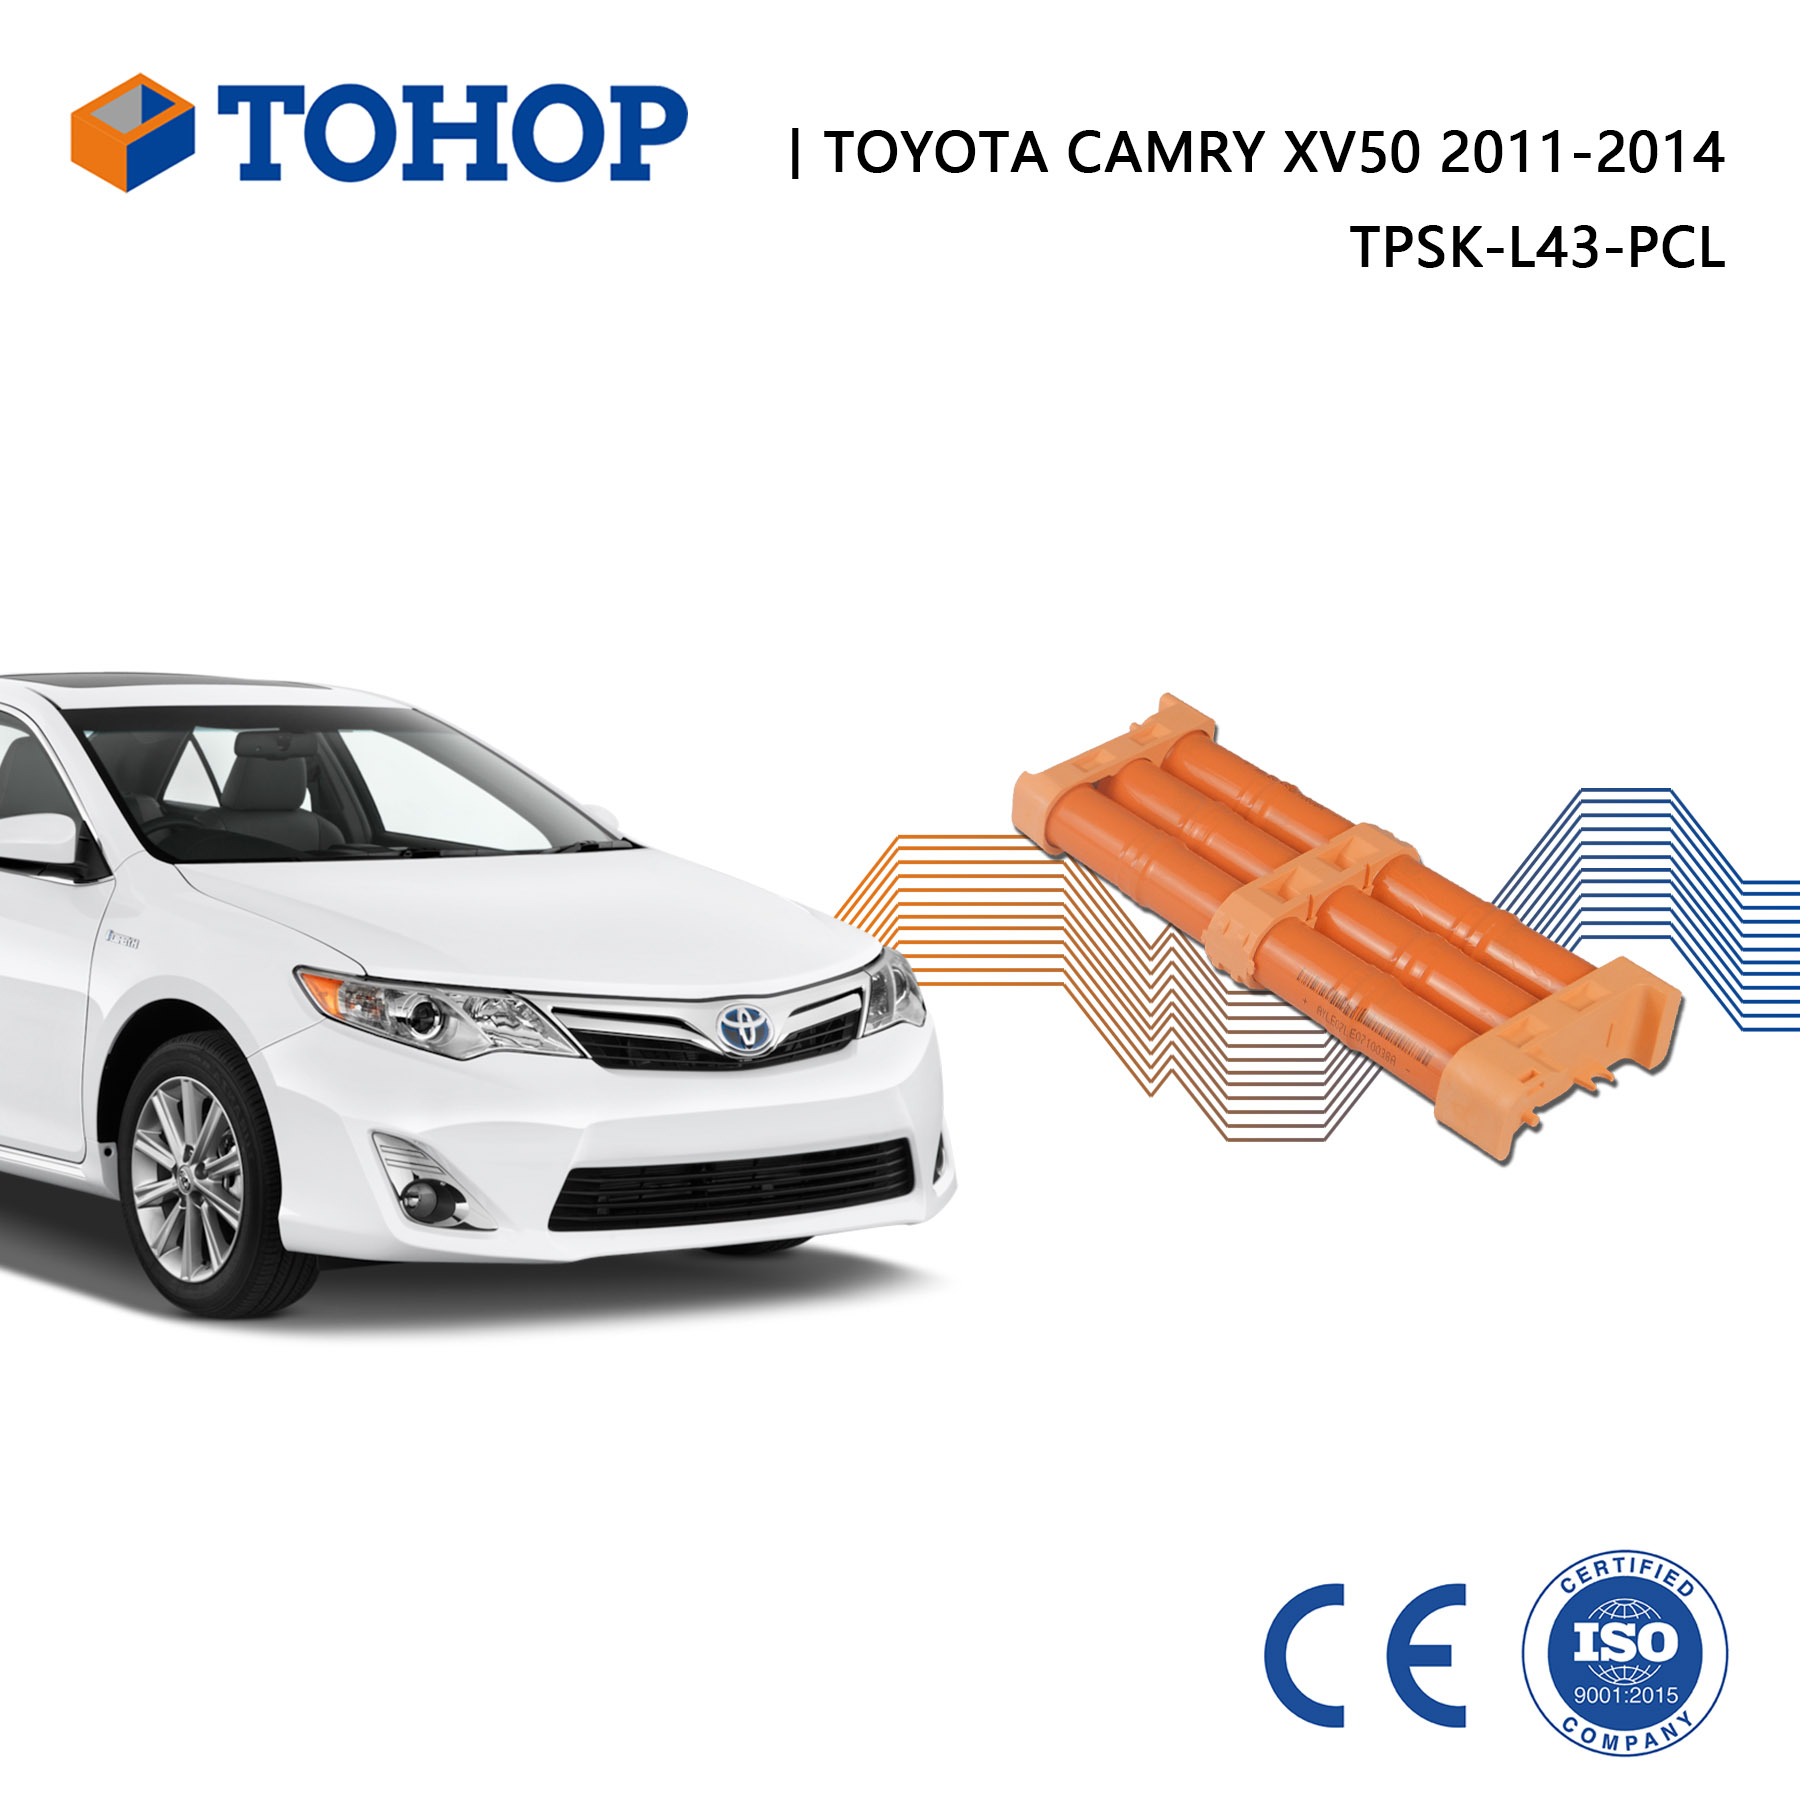 Toyota Aurion Hybrid Battery 2012-2016 for Toyota Replacement Camry XV50 Nimh Hybrid Battery